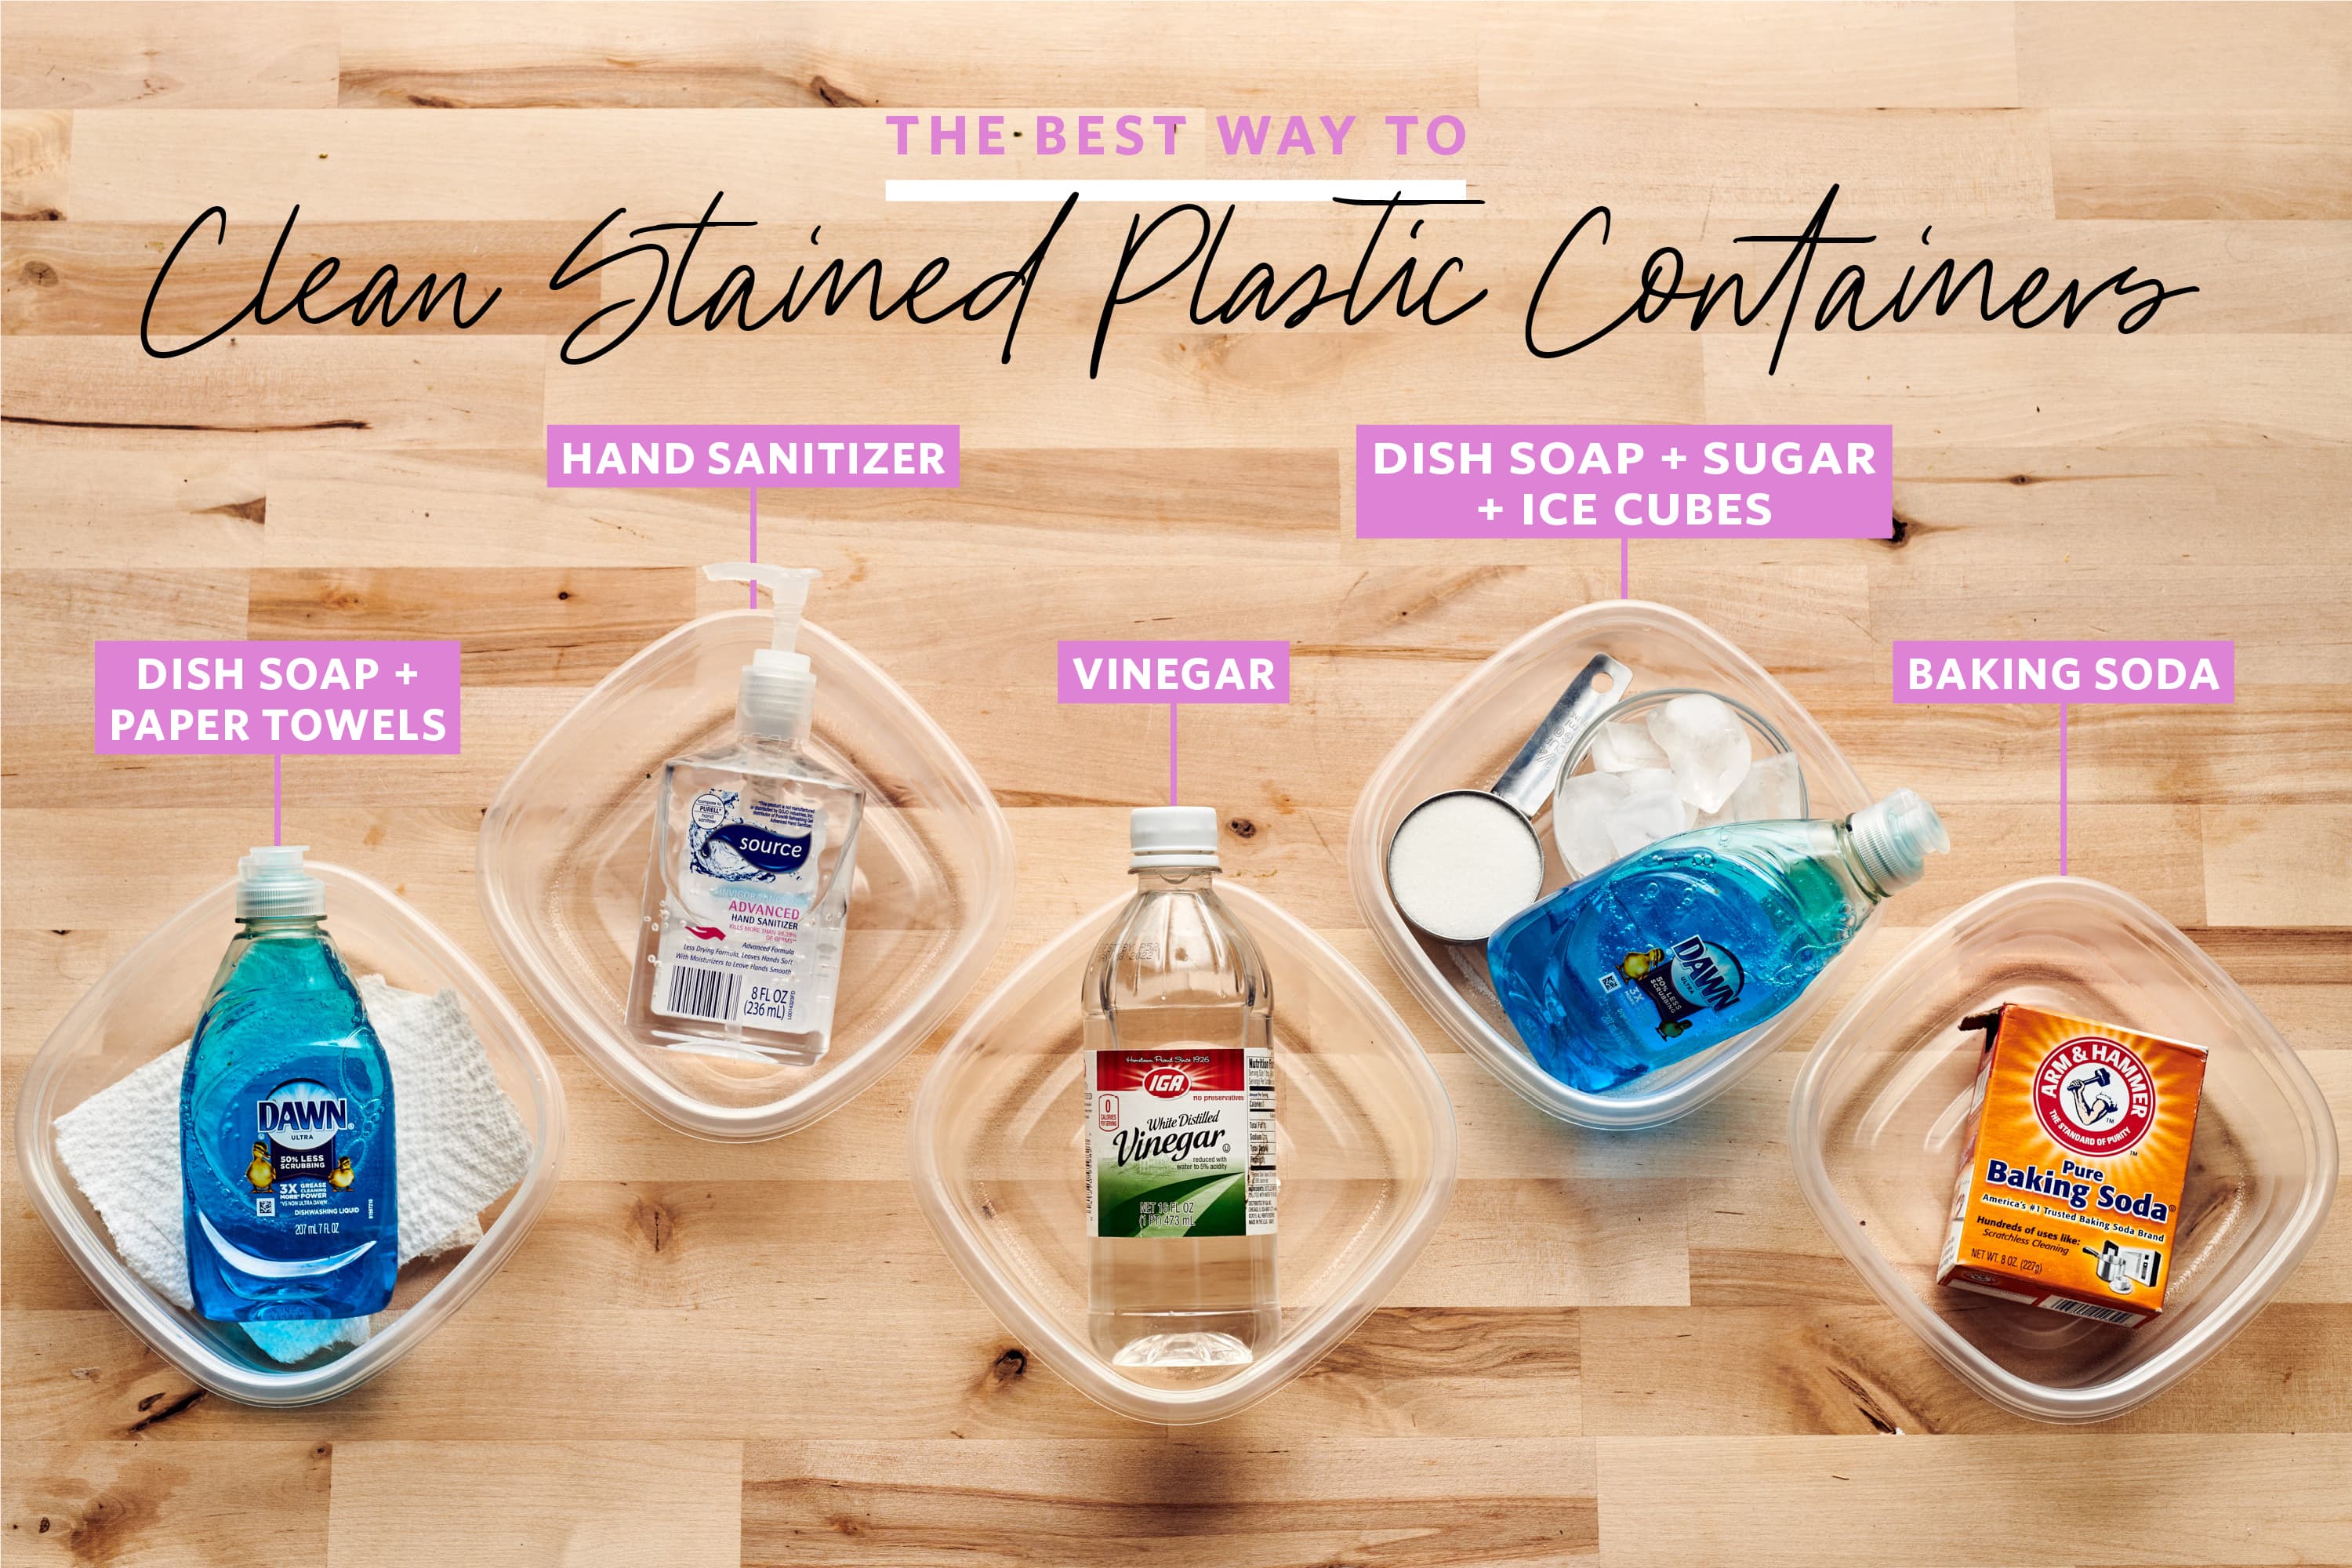 https://cdn.apartmenttherapy.info/image/upload/v1606151256/k/Photo/Lifestyle/2020-11-Cleaning-Showdown-Stained-Plastic-Containers/cleaning-plastic-container-lead.jpg